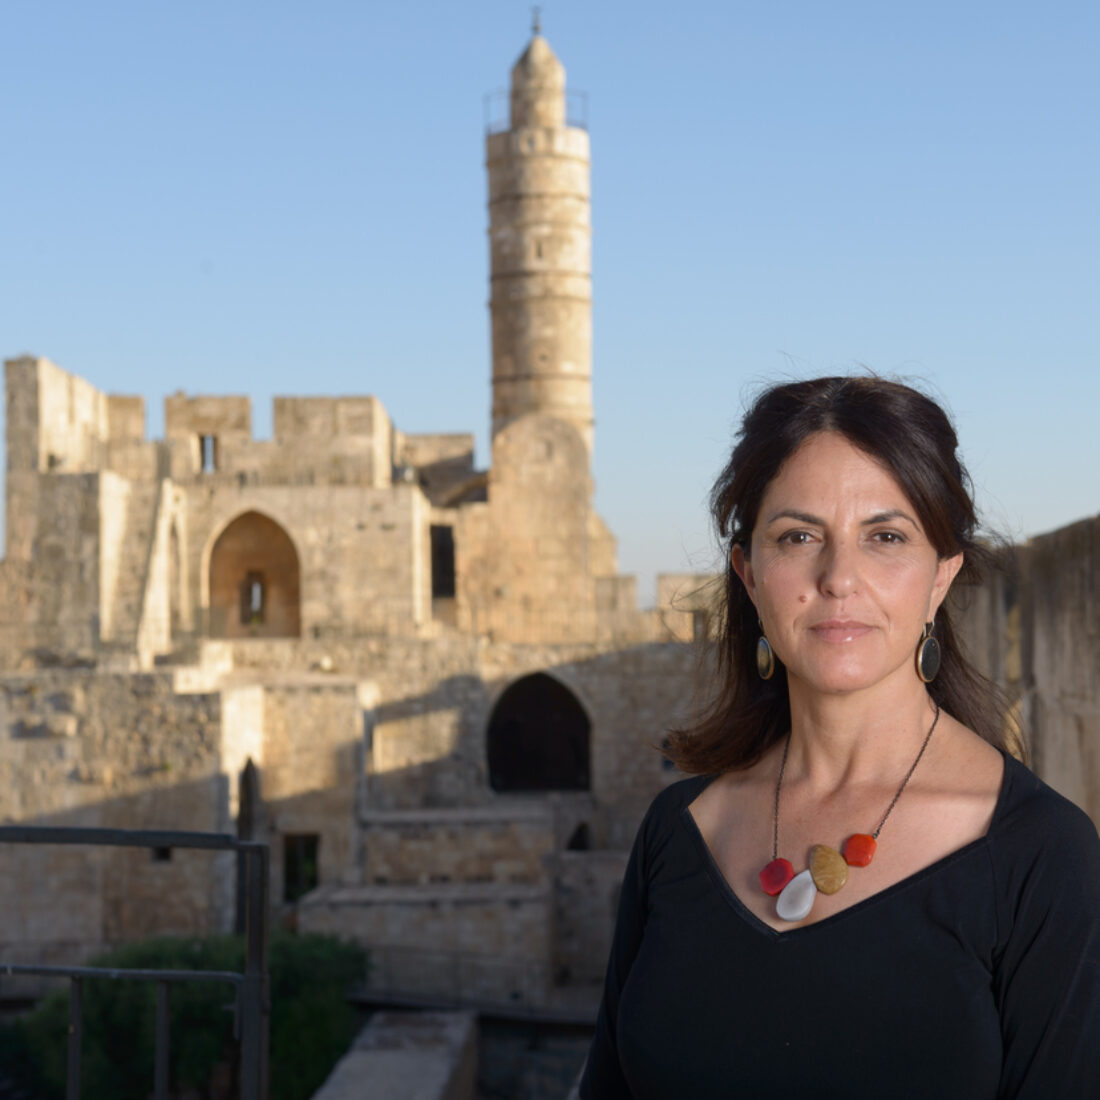 Tower of David Museum Director Eilat Lieber. Photo by Yuval Yosef